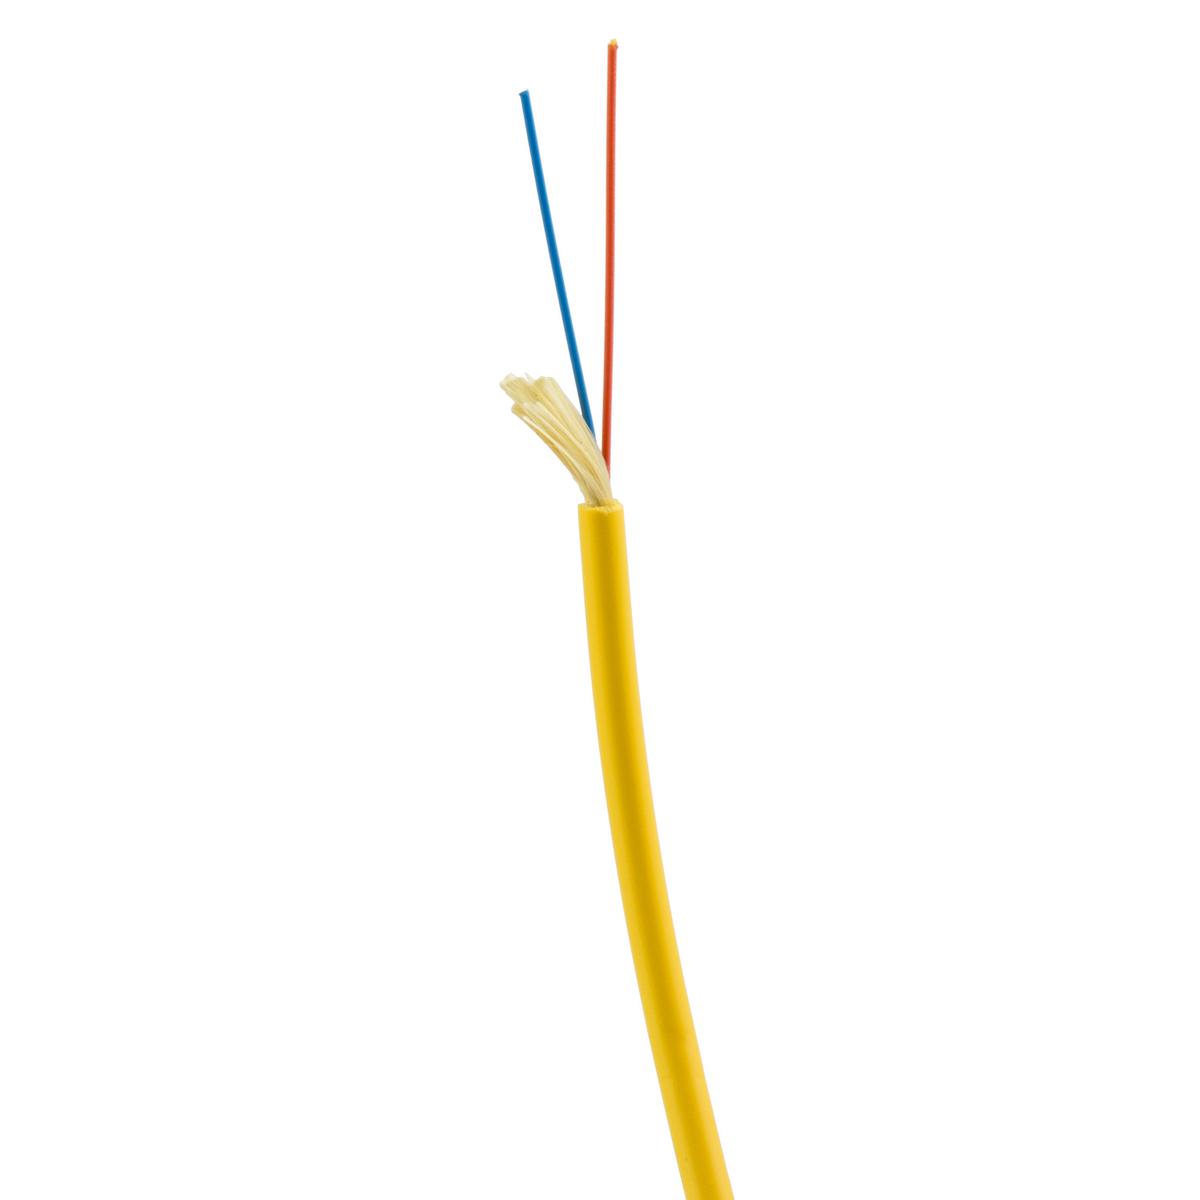 Hubbell HFCD1002RS HFCD1 Series Indoor Tight Buffer Distribution, 2 strand, Riser, OS2, SM , Yellow Jacket  ; Corning ULTRA SMF-28� Singlemode Bend-Insensitive Optical Fiber ; E-Z Strip Buffer For Contractor-Friendly Termination ; Compact Cable Diameter Reduces Pathway Cong